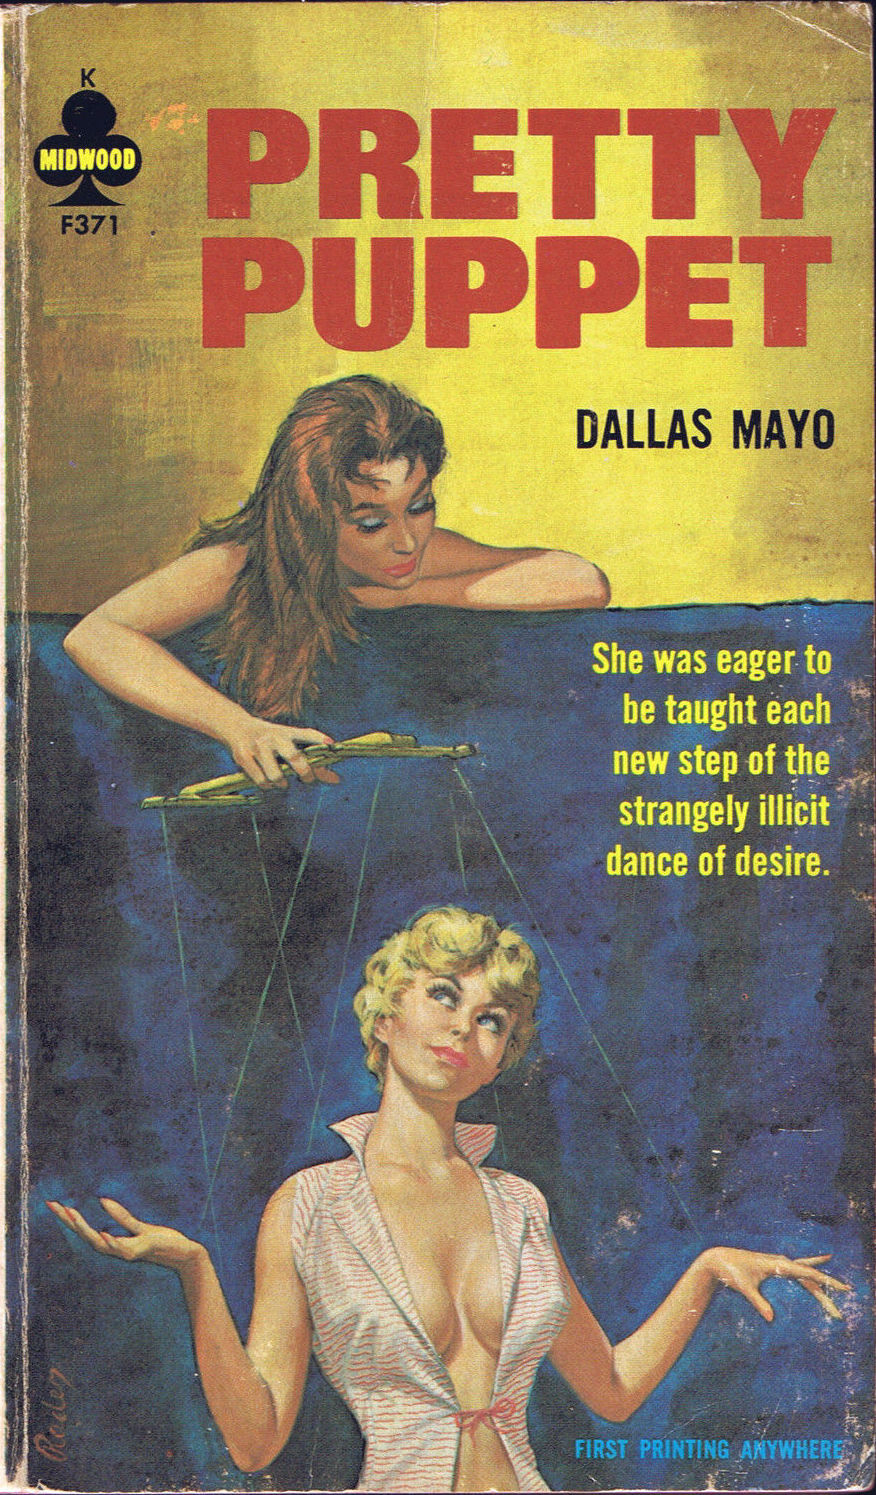 She was eager to be taught each new step of the strange illicit dance of desire Midwood-F371-1964